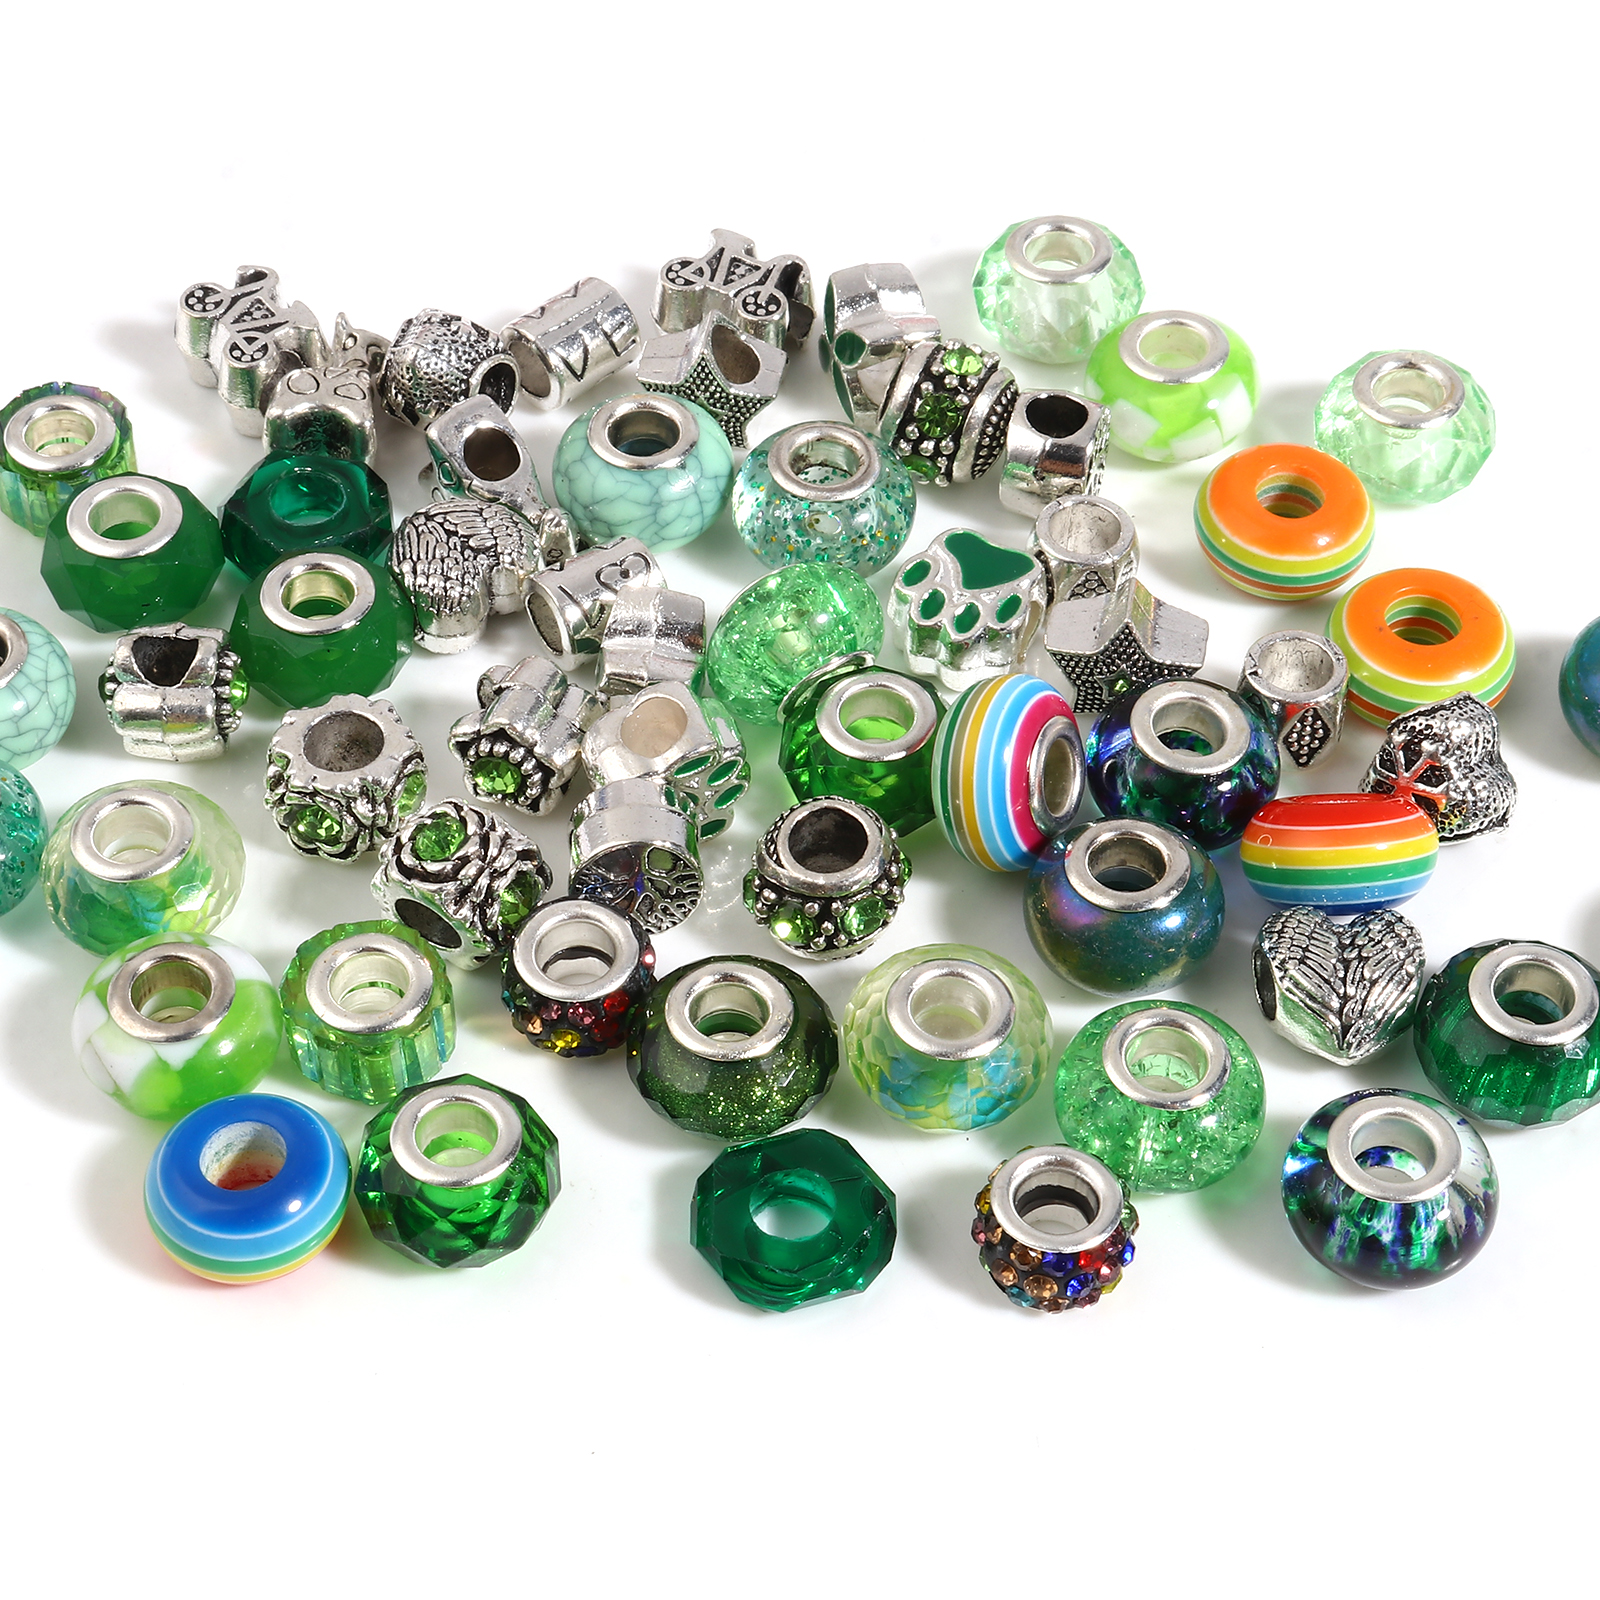 Picture of Zinc Based Alloy & Acrylic Large Hole Charm Beads Silver Tone Green Round At Random 14mm Dia., 9mm x 8mm, Hole: Approx 5.1mm - 4.5mm, 1 Set(60 Pcs/Set)